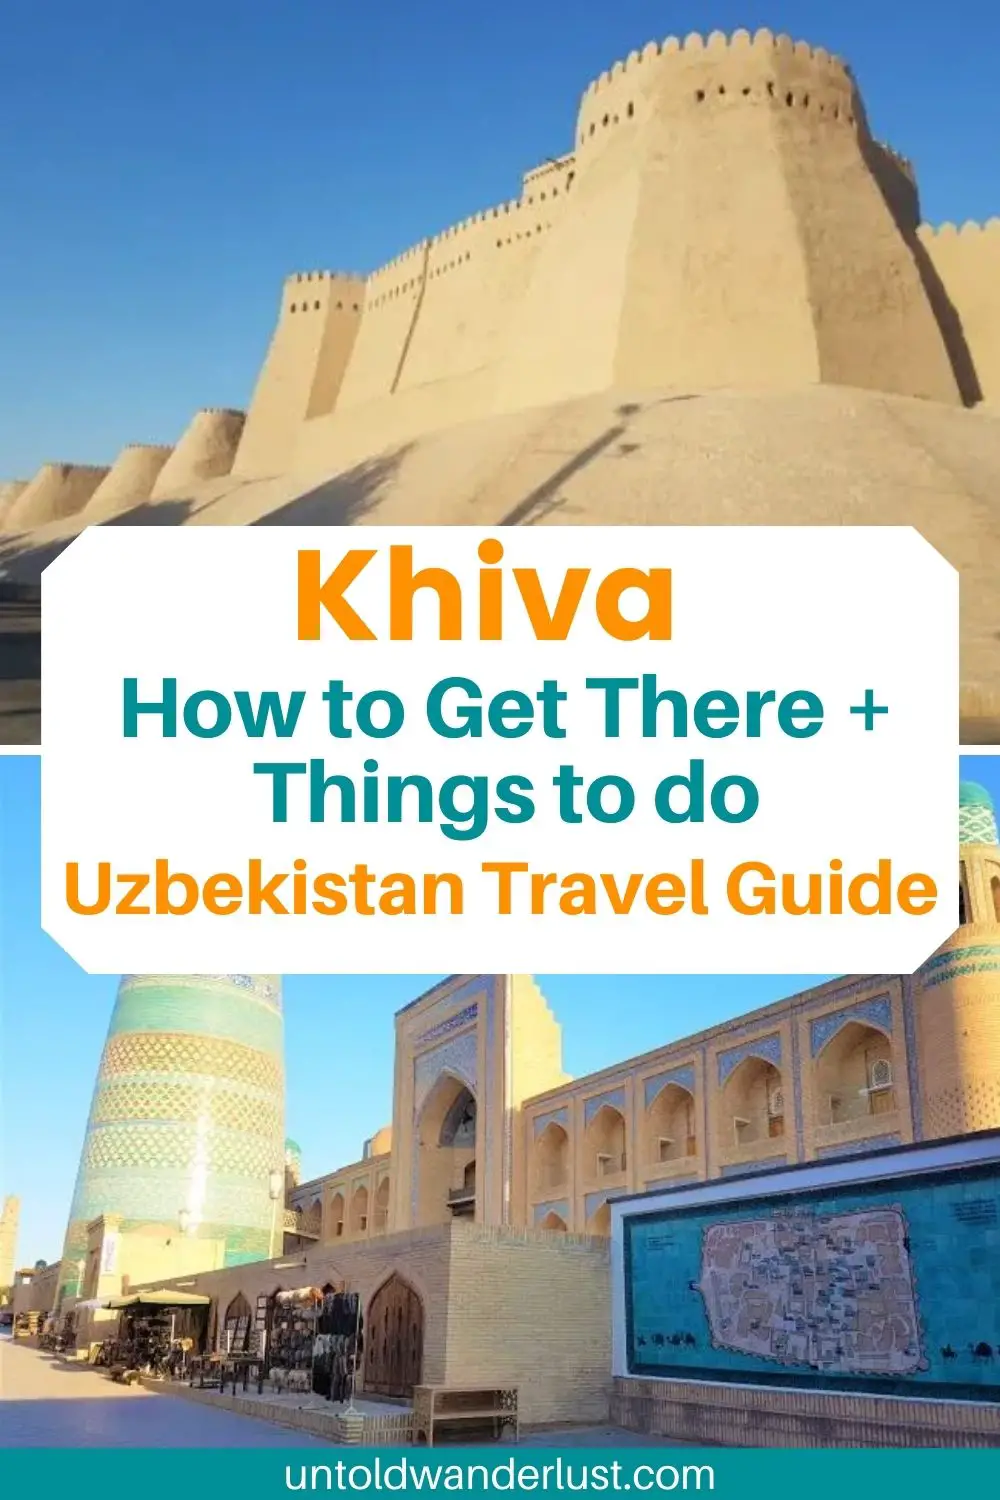 Khiva, Uzbeskistan Travel Guide | How to Get There + Things to do